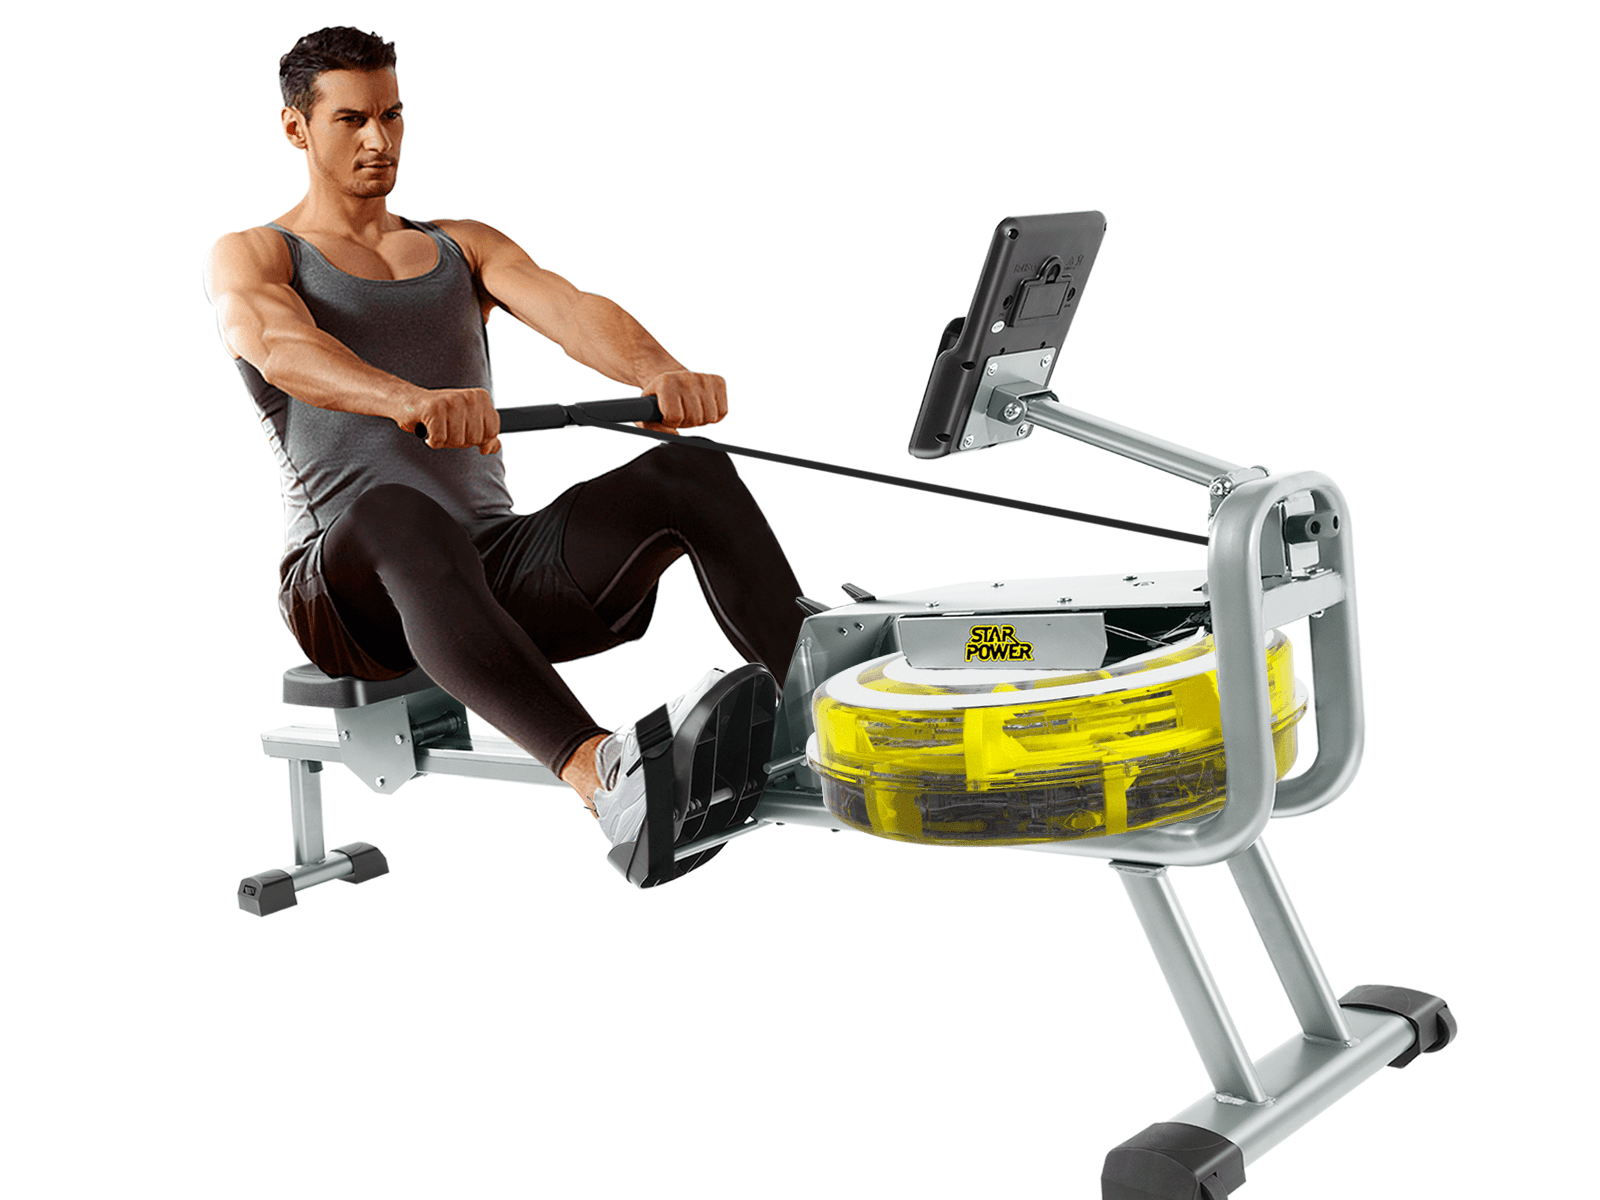 Water Rowing Machine 335LB Weight Capacity - Water Rower for Home Use with LCD Monitor, Tablet Holder